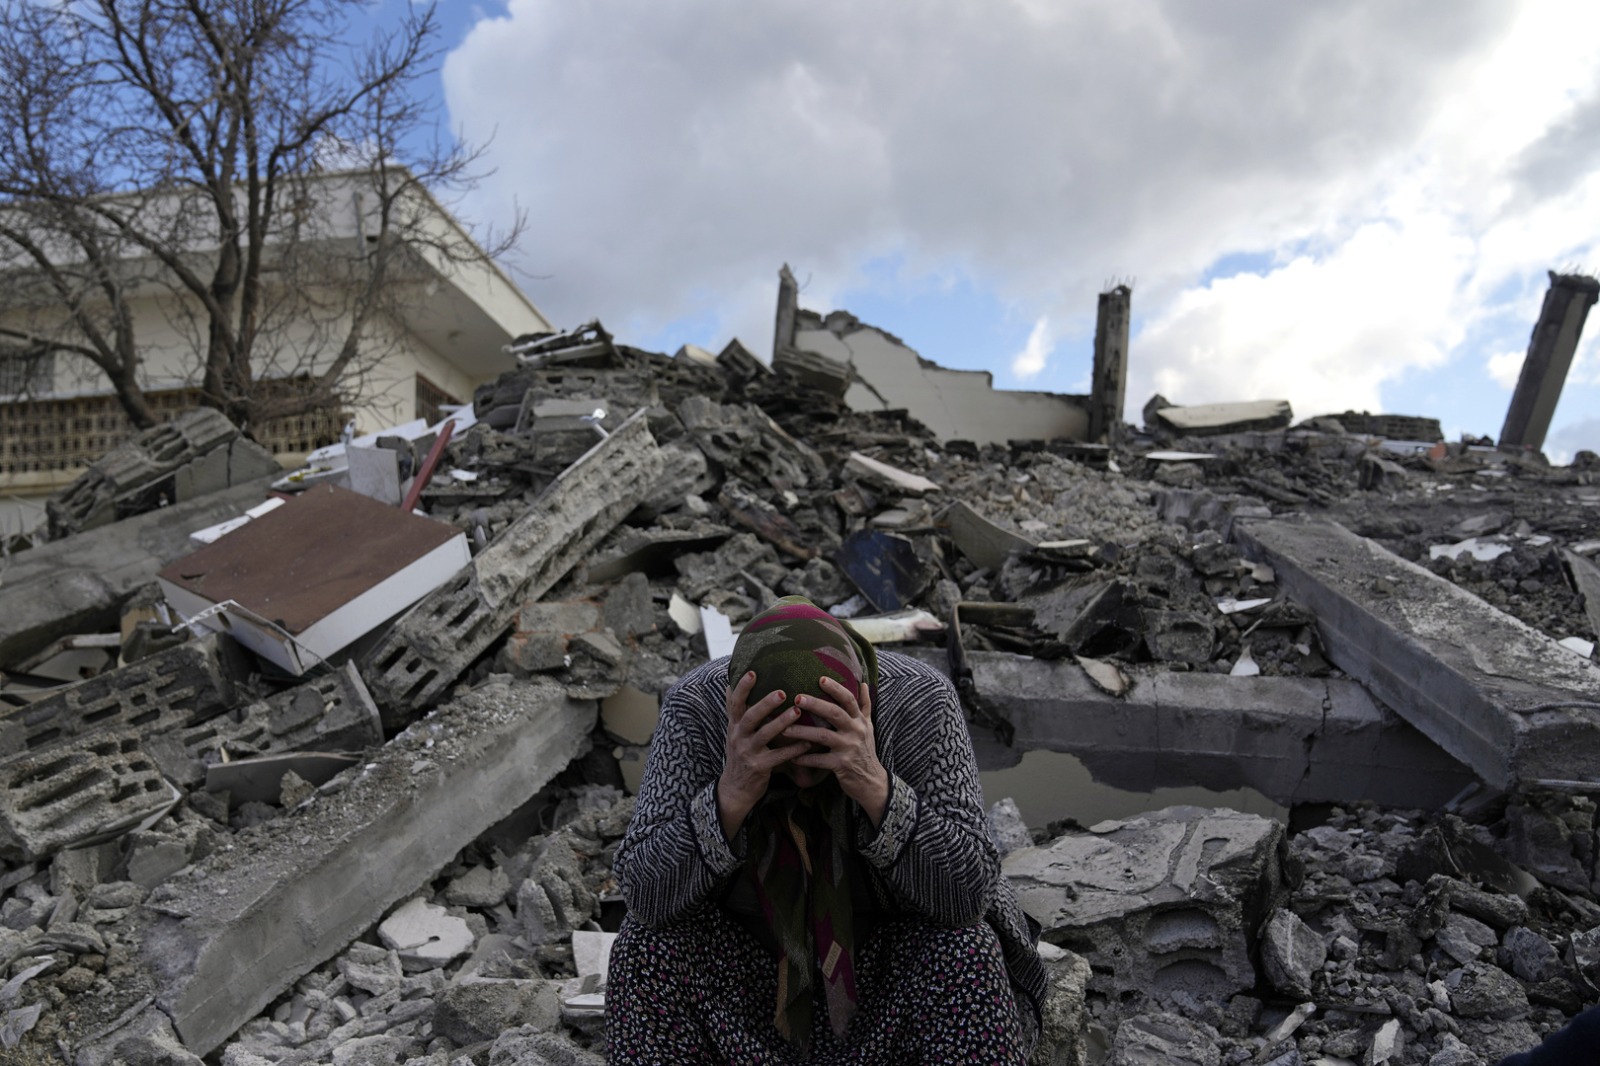 More than 50,000 killed in quake that struck Turkey, Syria on February 6